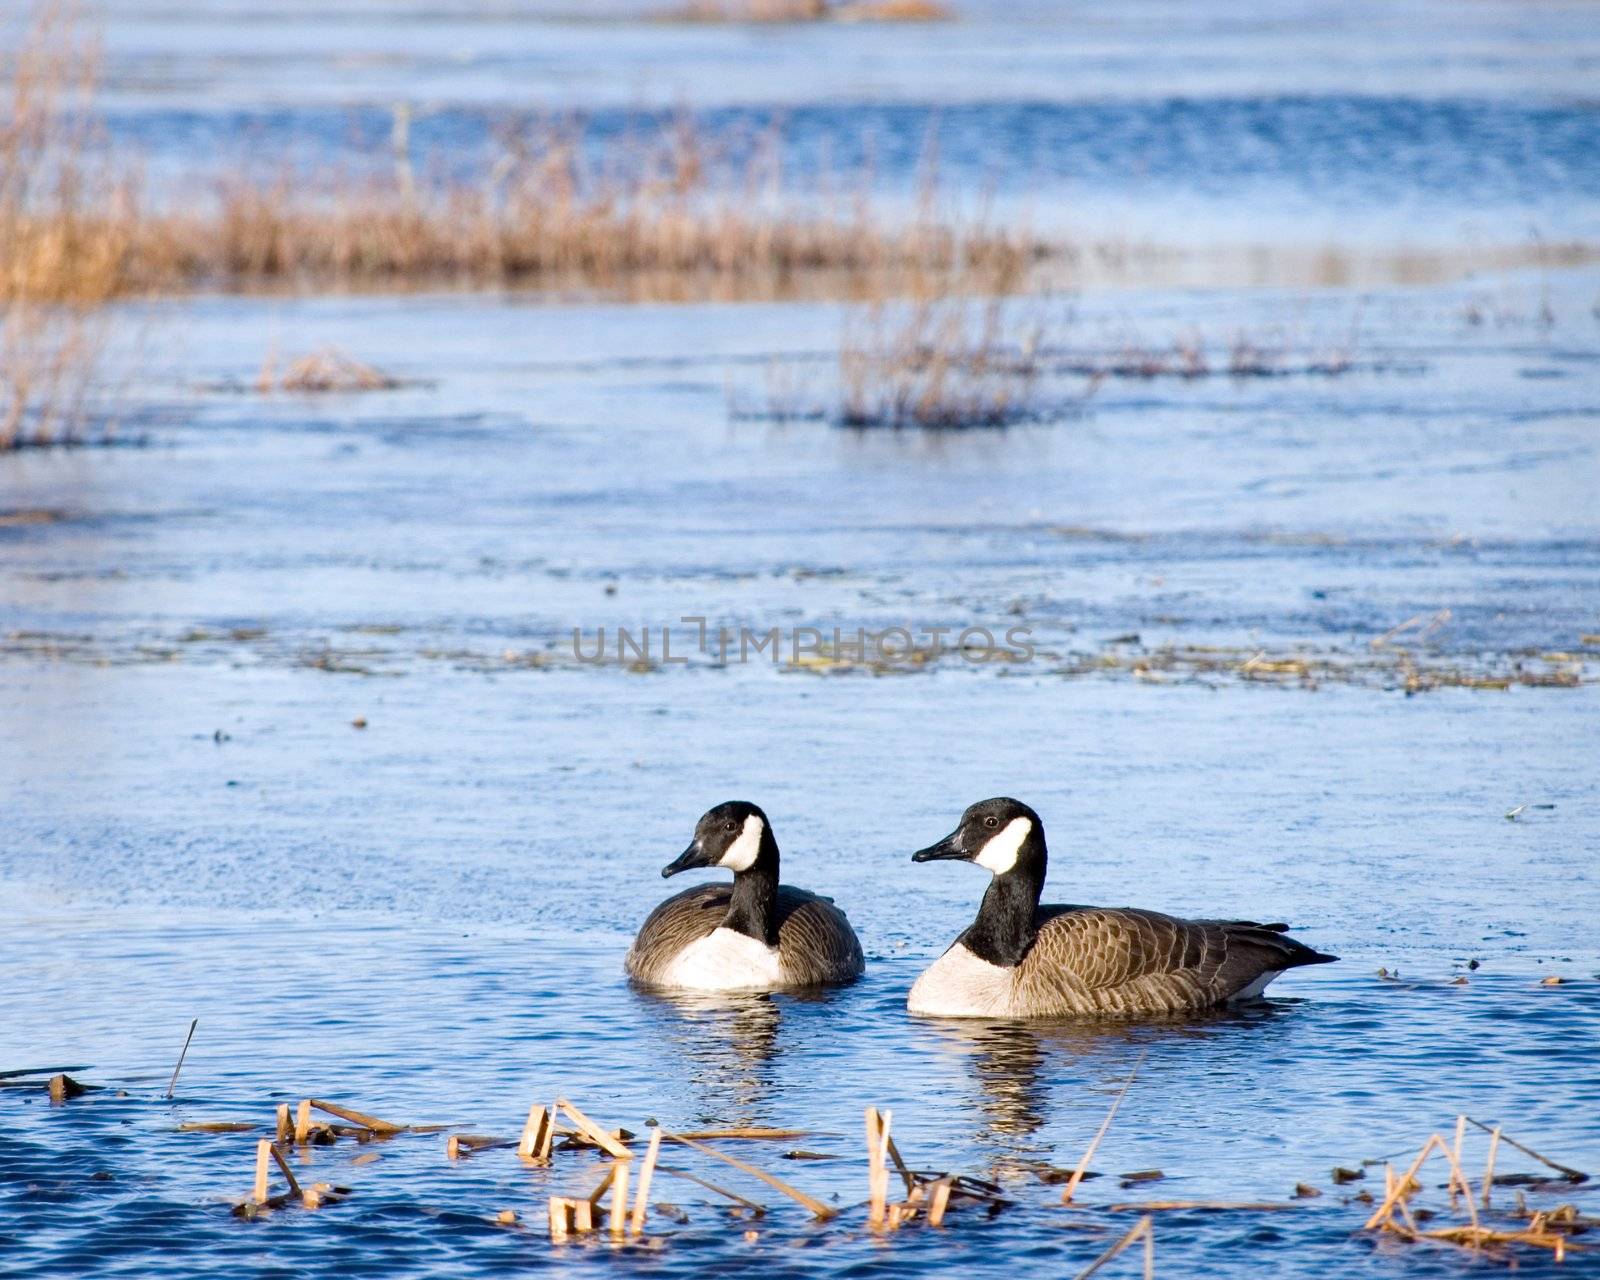 A pair of Canada geese swimming in a pond.